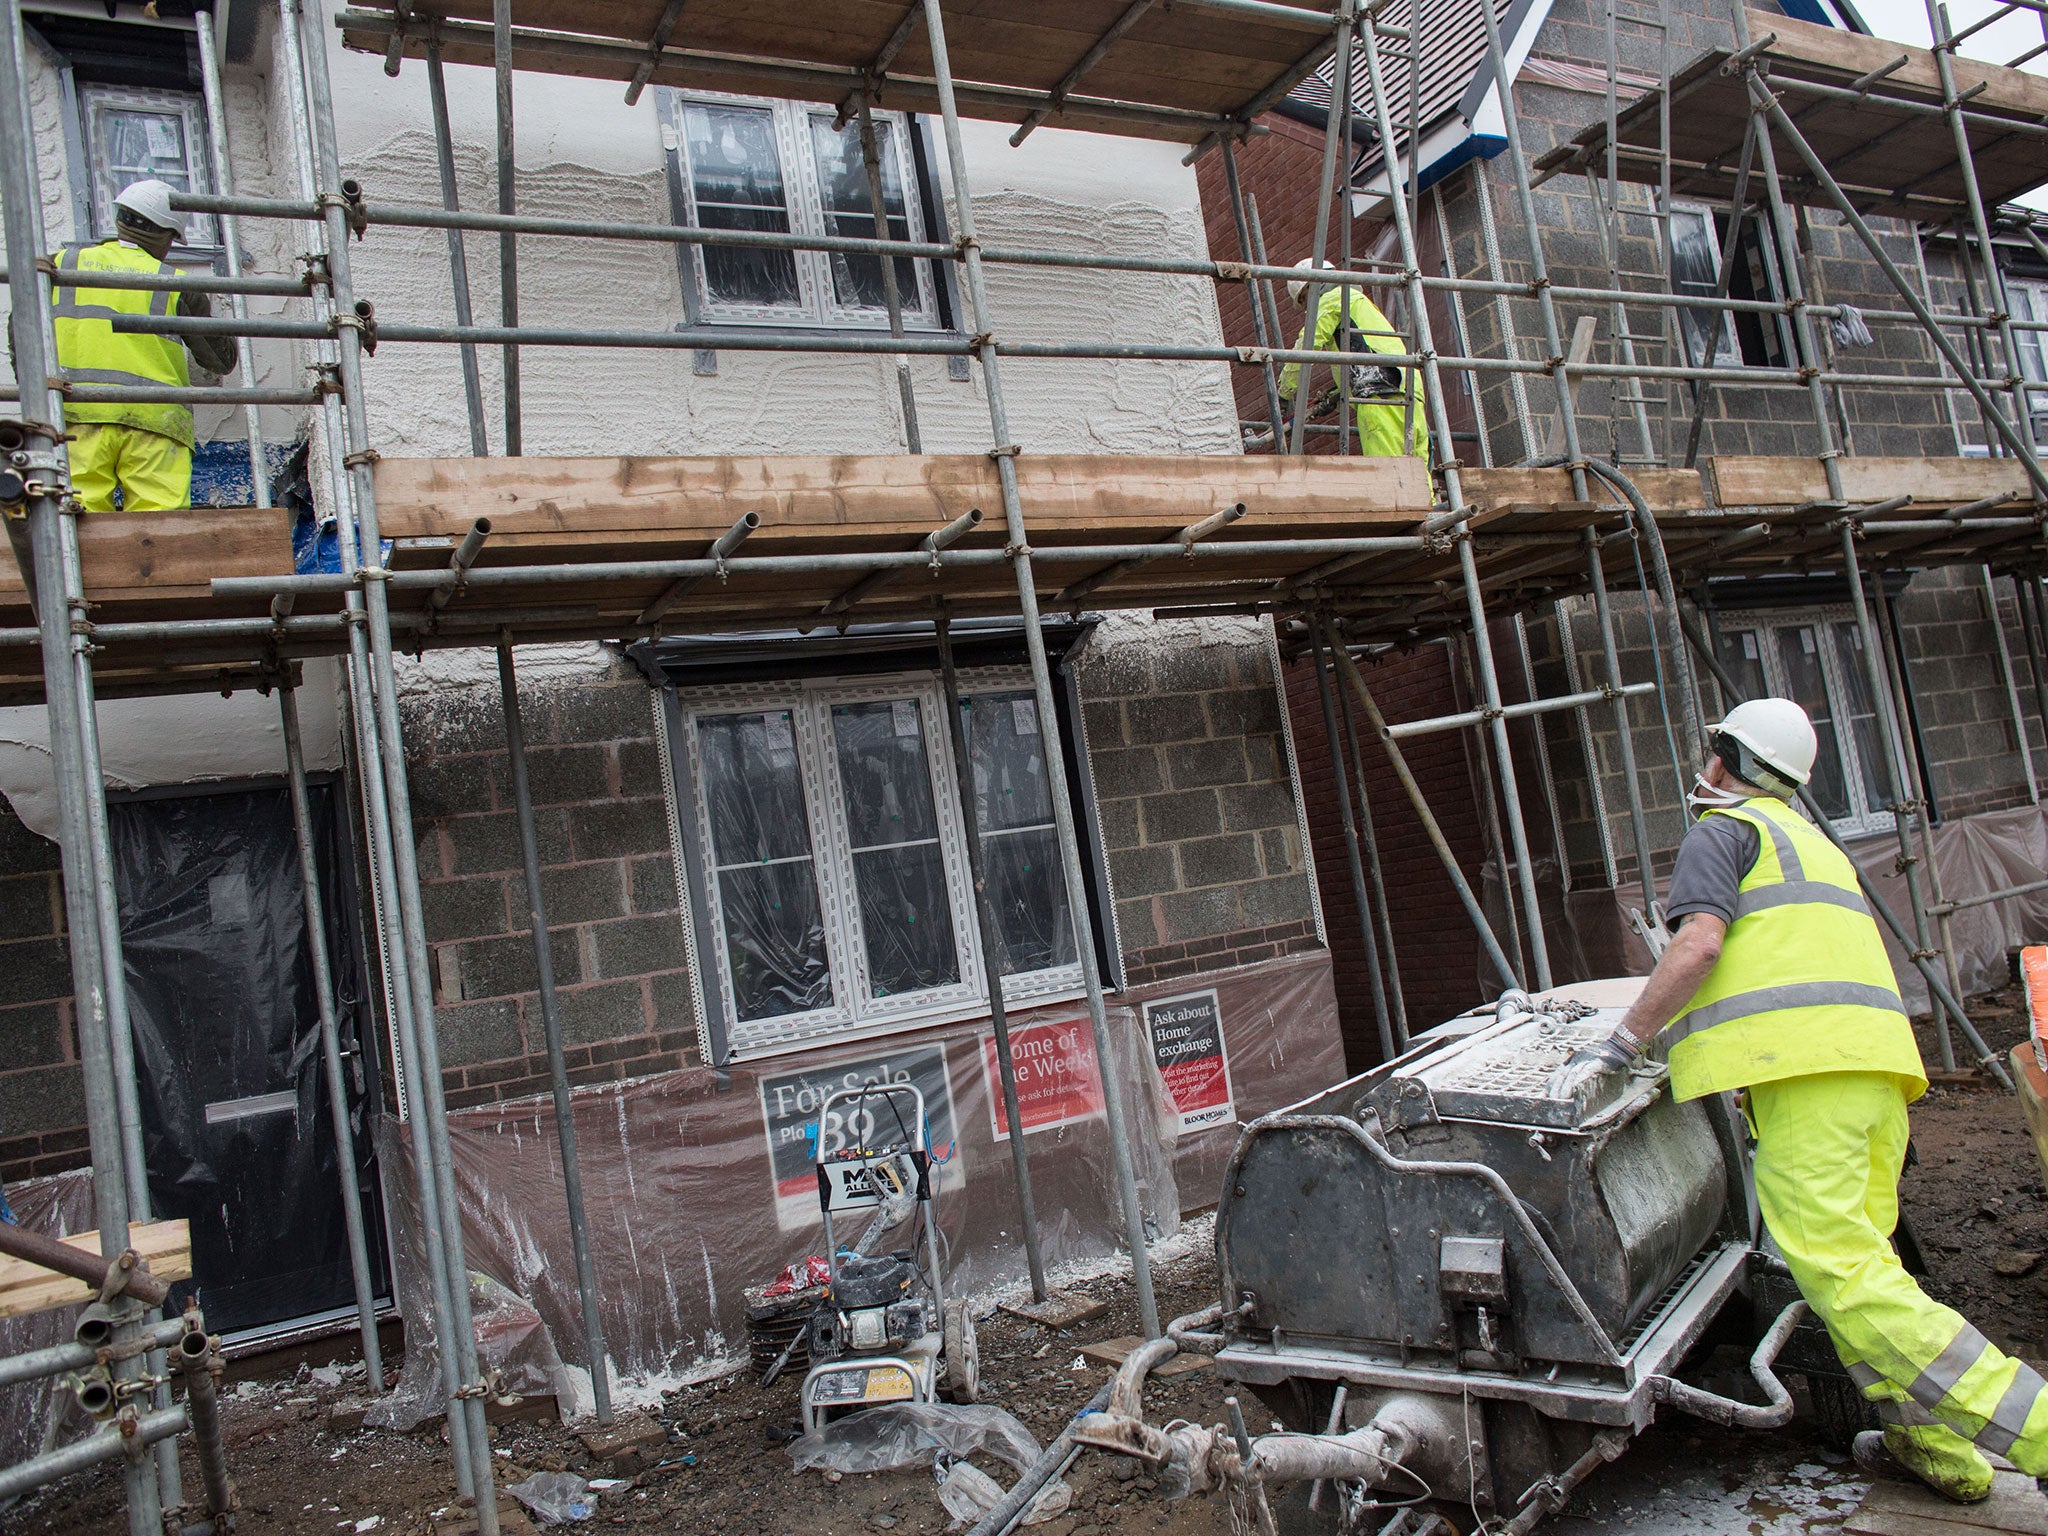 George Osborne is to speed up planning processes to get more new houses built